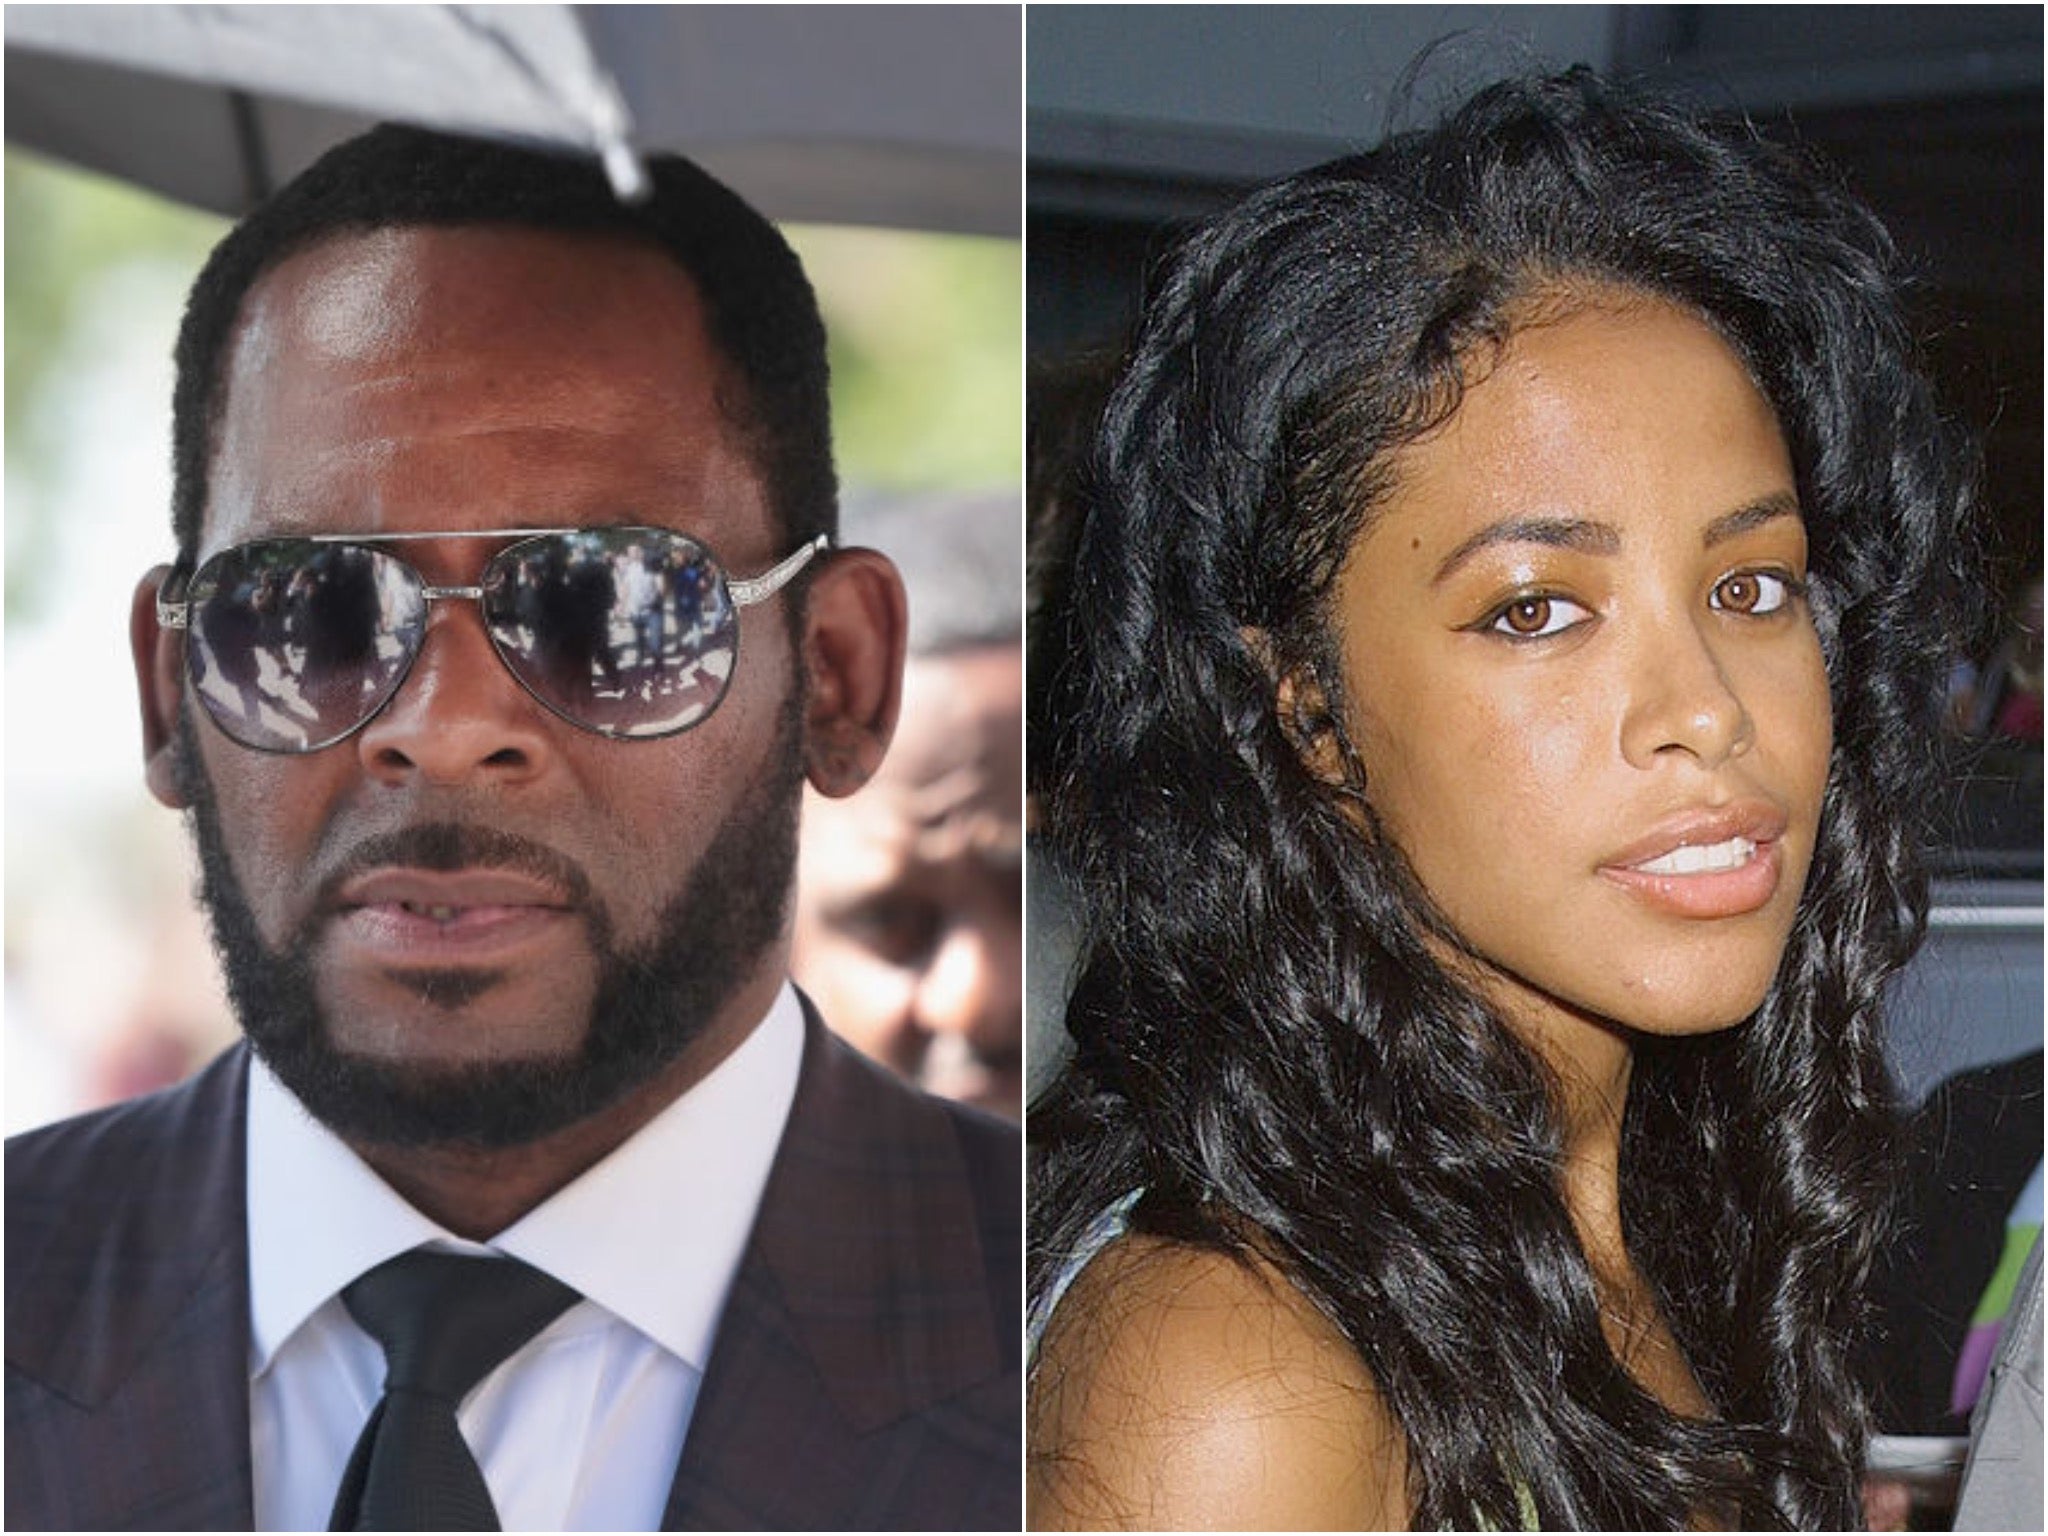 R Kelly arrives in court in 2019, and the late Aaliyah in 2001